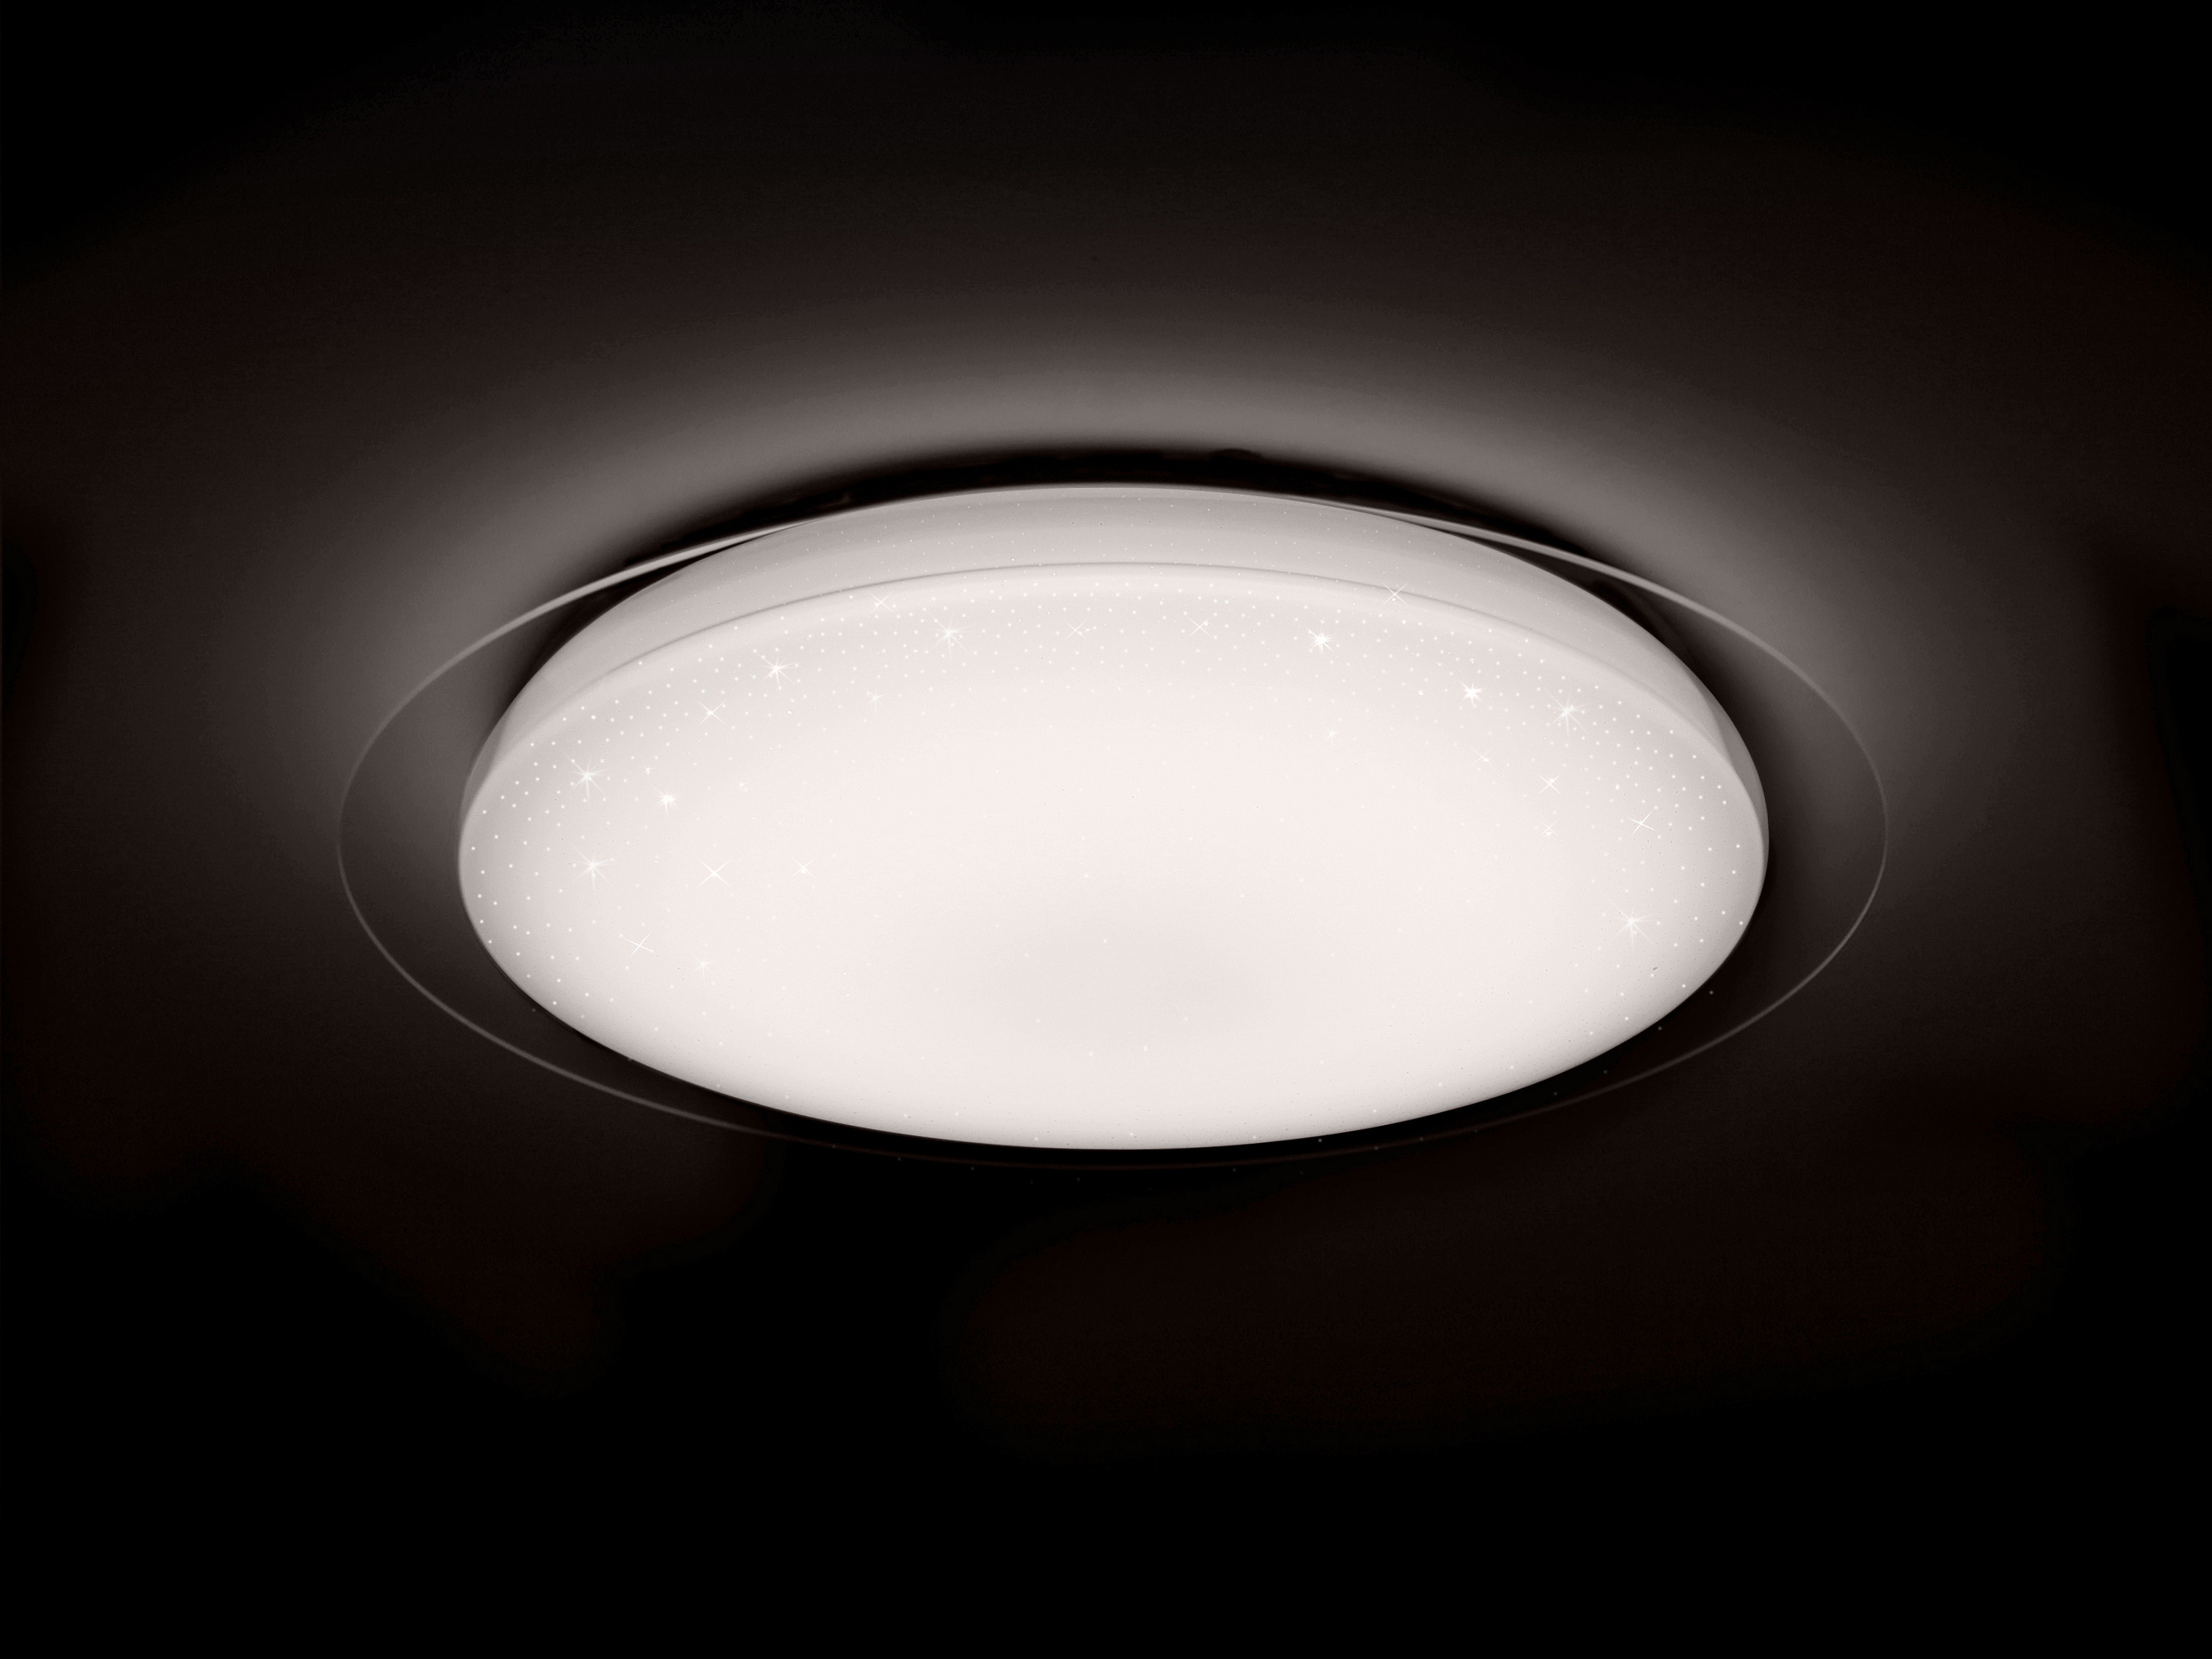 Eye - Protection 28W LED Indoor Ceiling Lights DL-C28TX Without LED Blue Light Extravasation